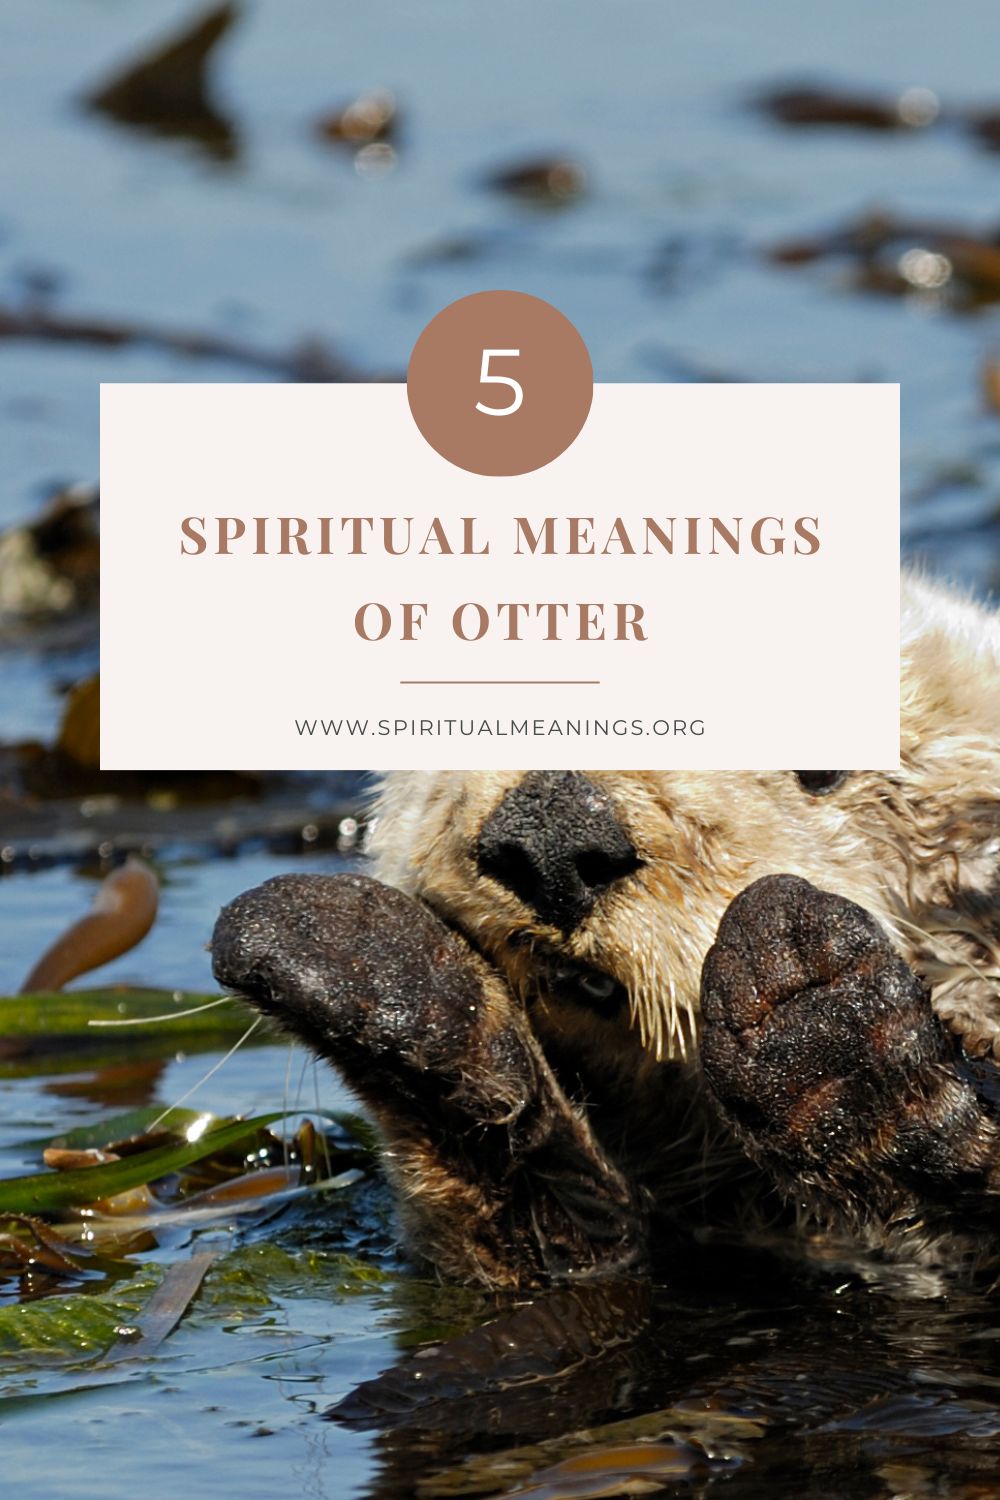 5 Spiritual Meanings of Otter